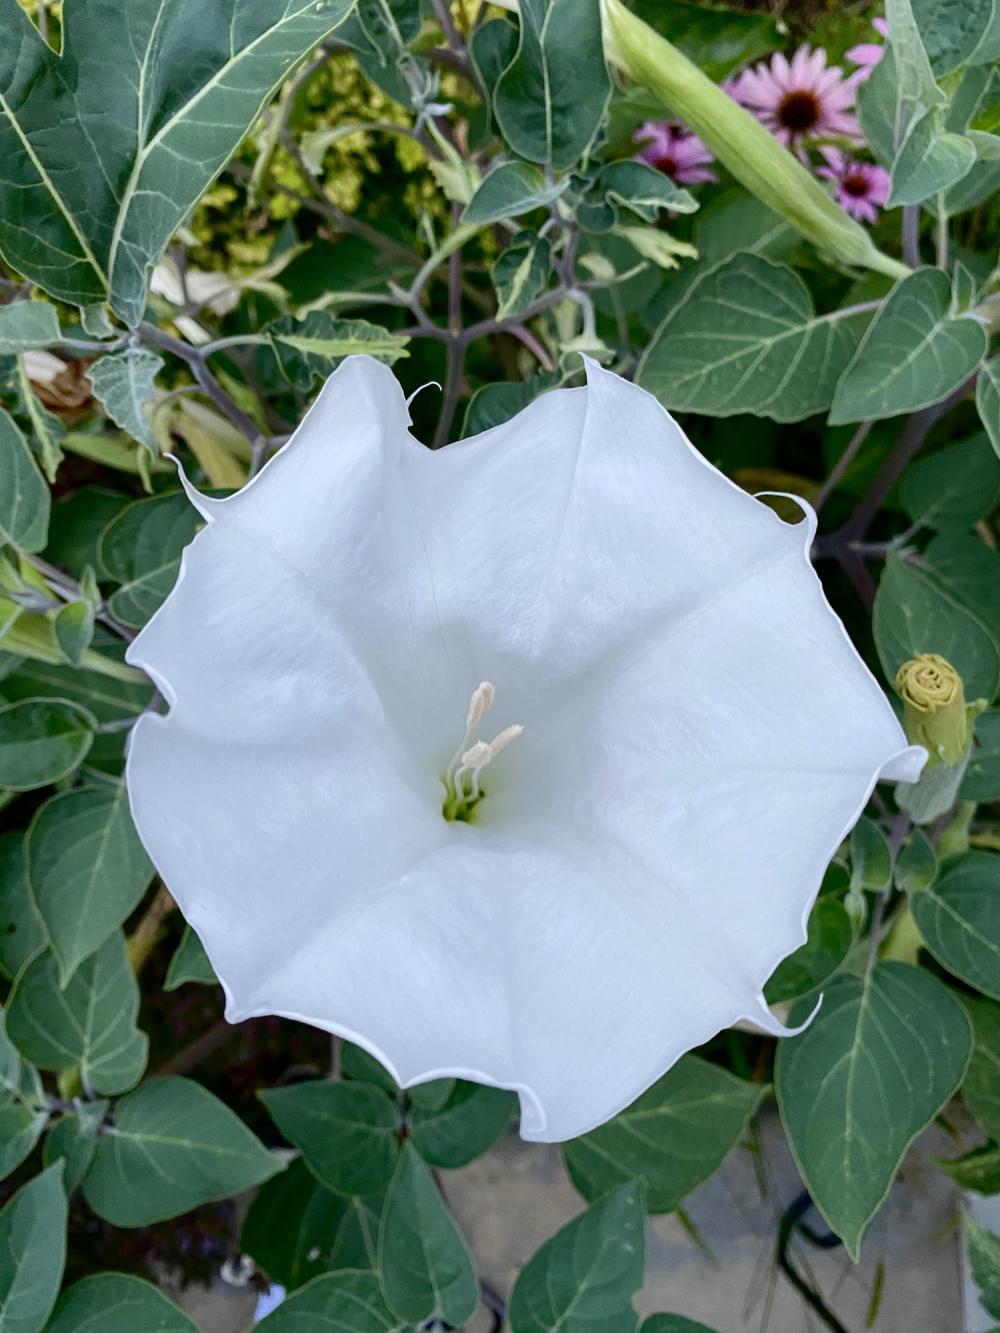 Yet another moonflower